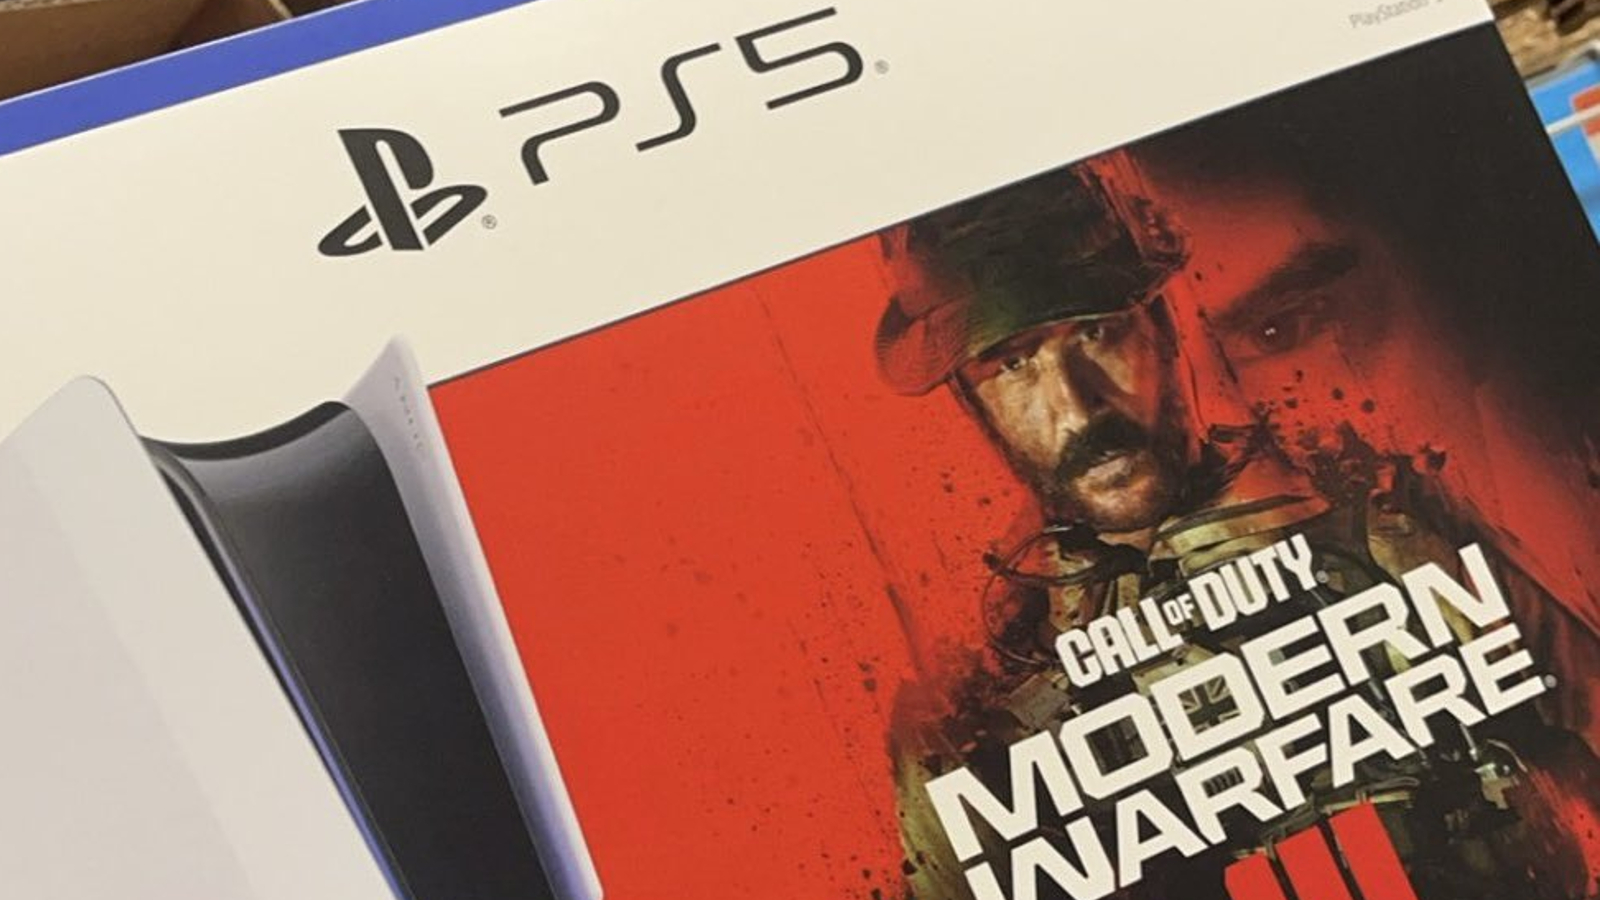 Modern Warfare 3 PS5 Bundle Will Feature New Slim Console - Insider Gaming